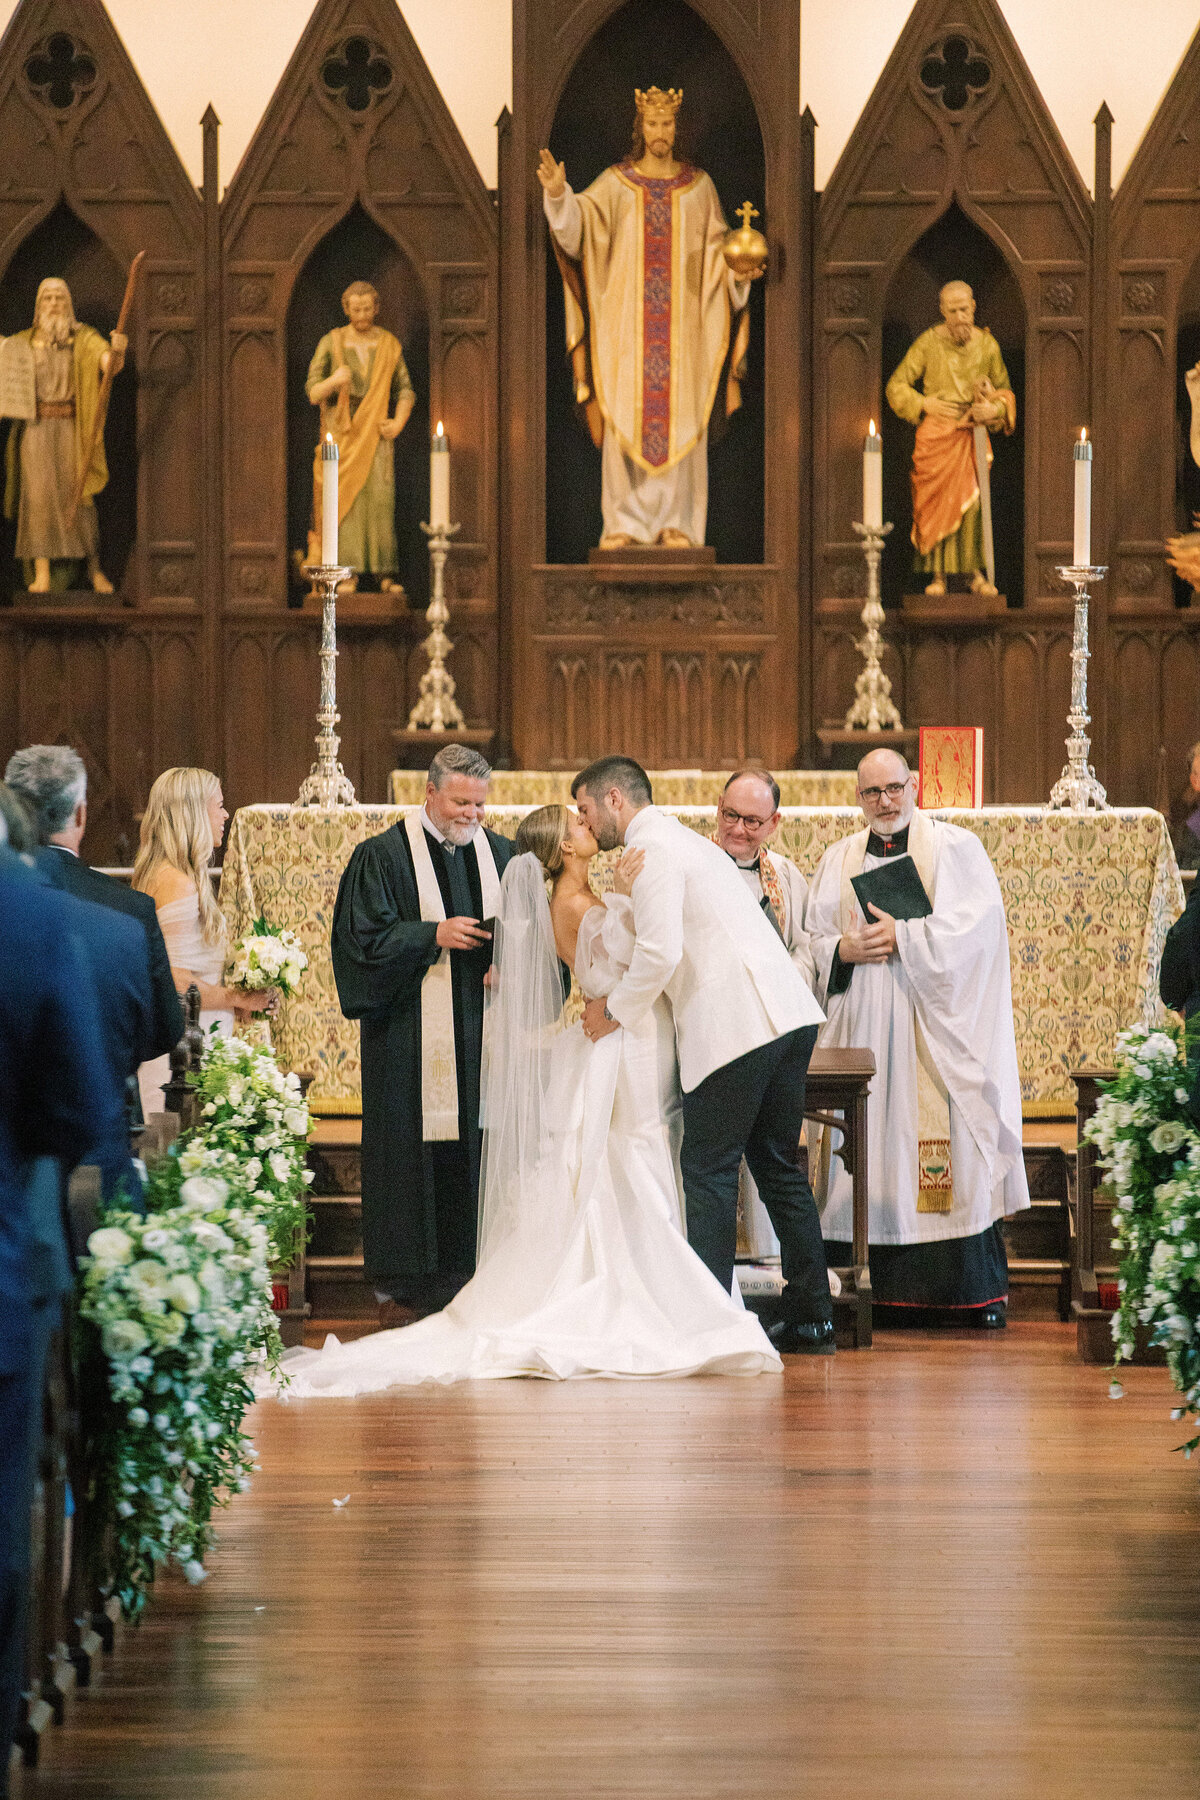 Wedding ceremony at St. Peters Anglican Church in Tallahassee FL - 4